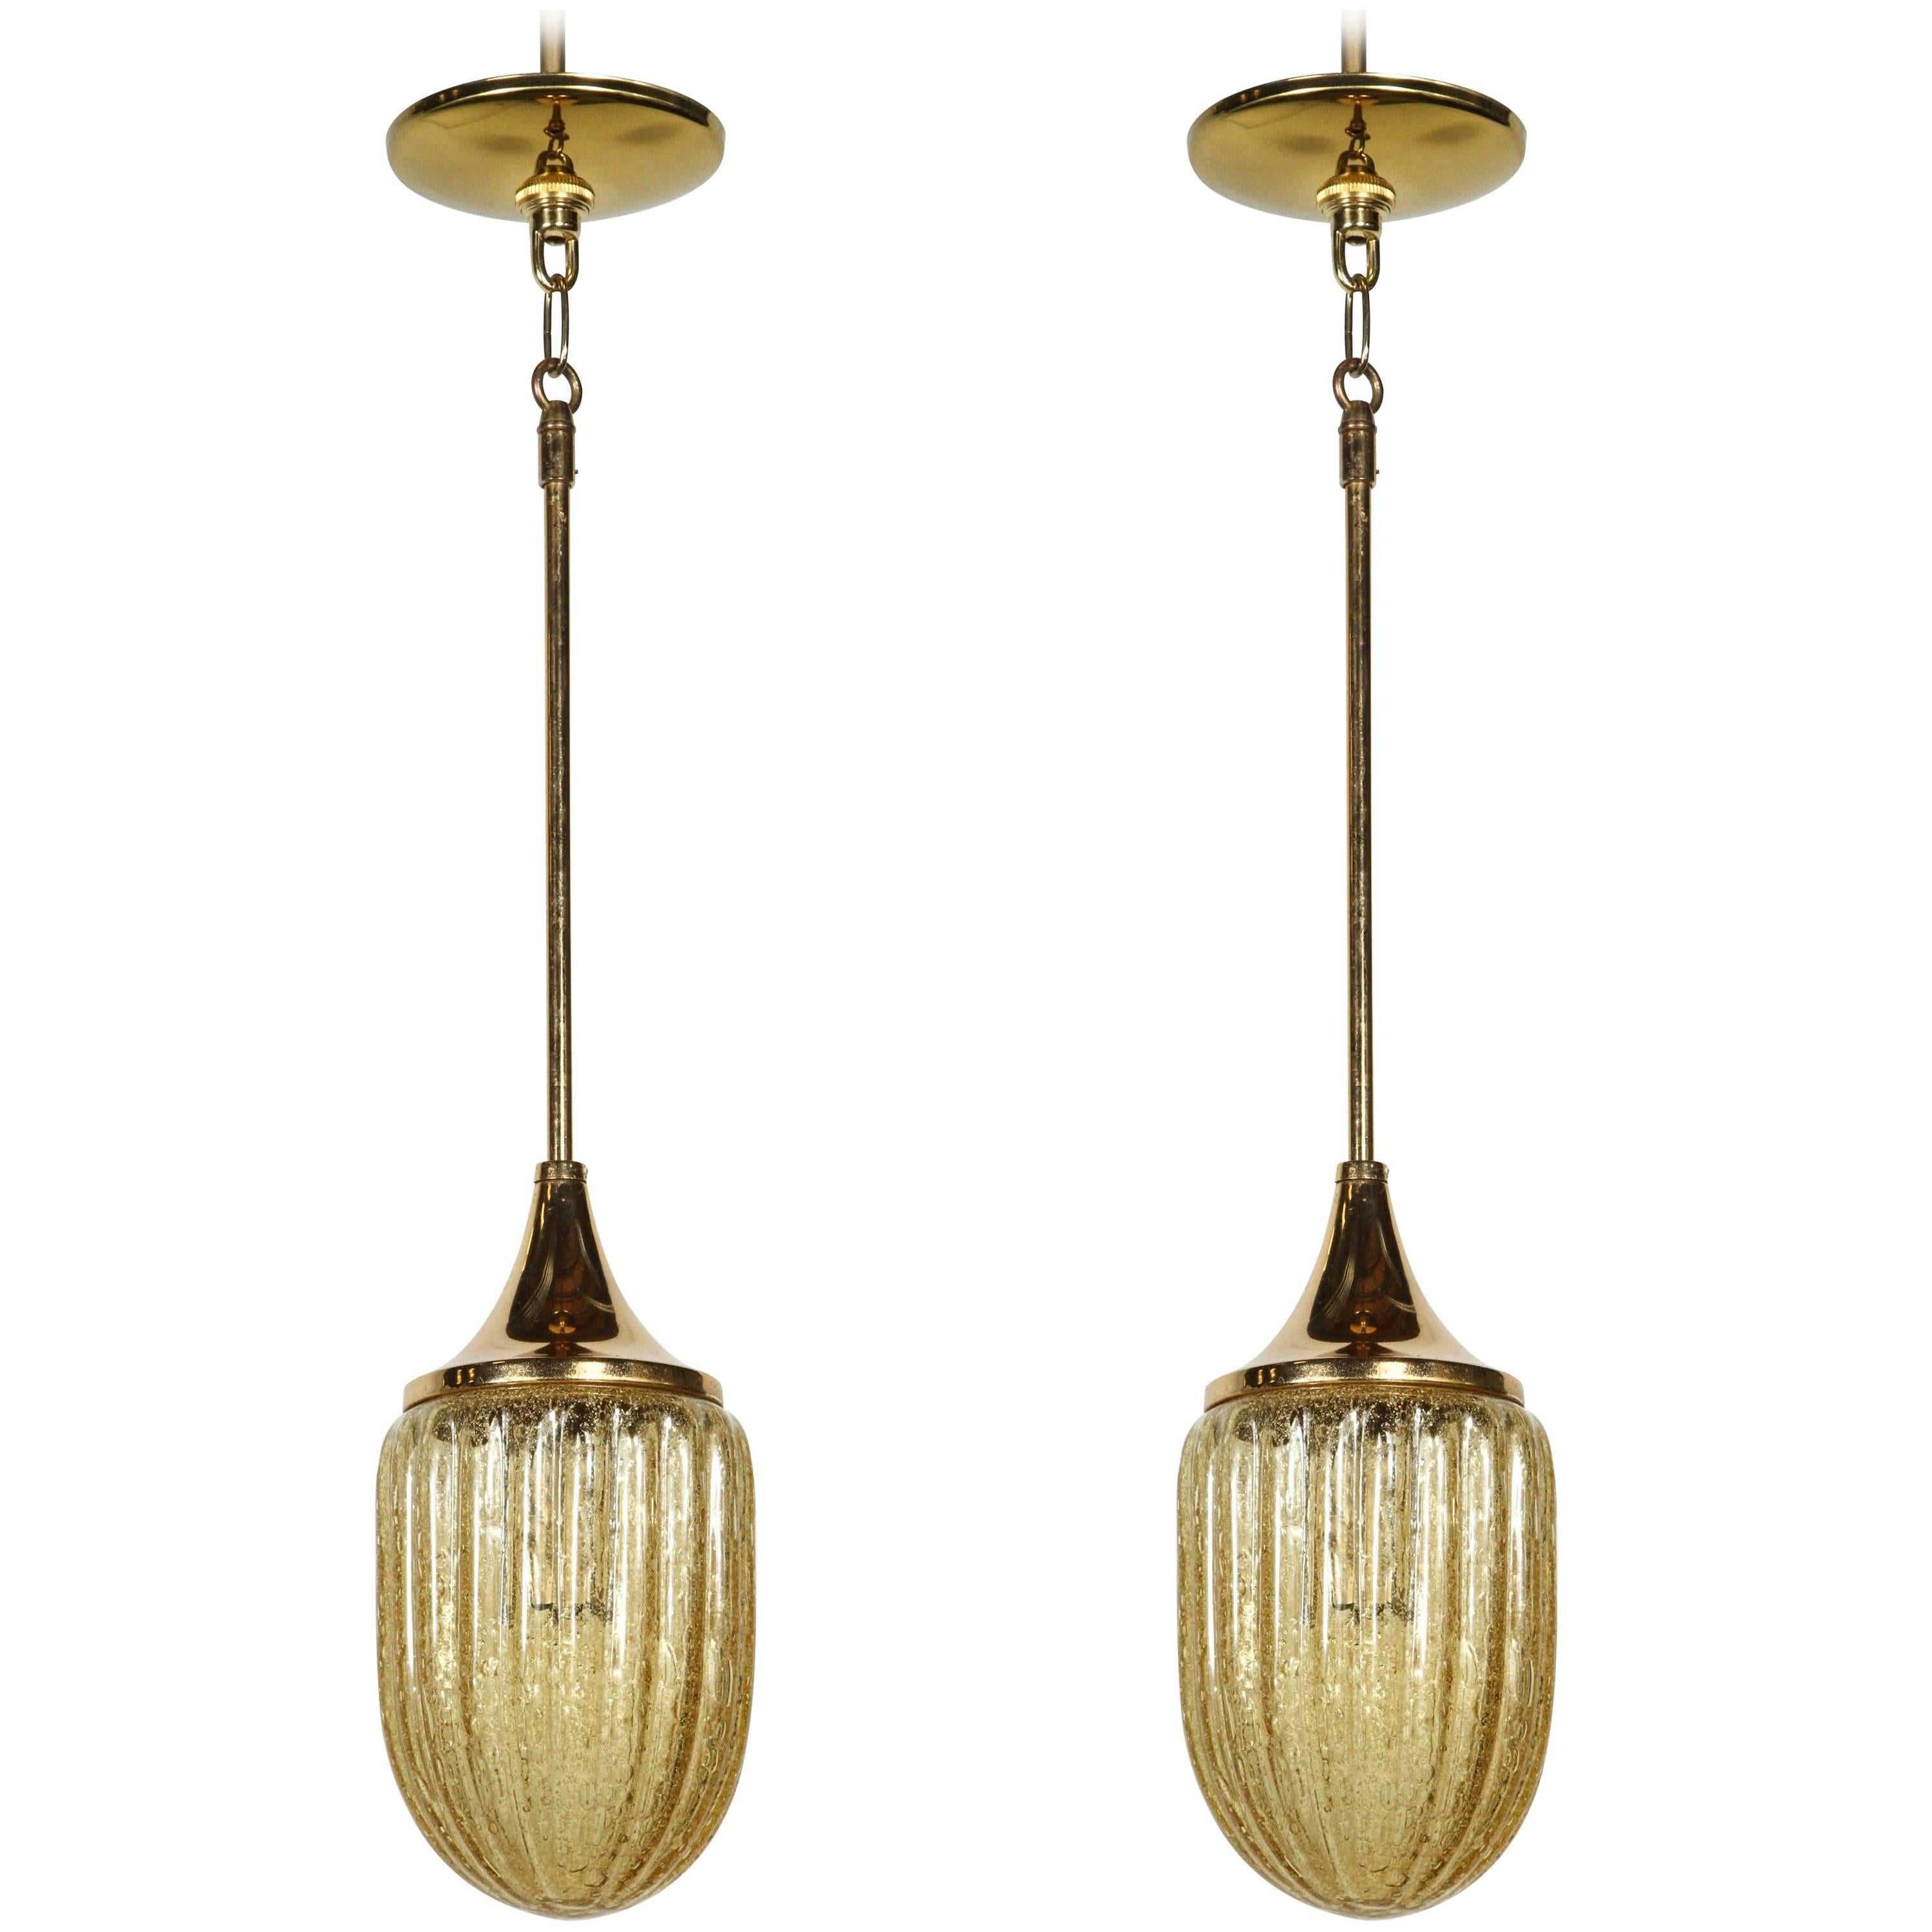 Great Pair of Amber Glass Pendant Lights by Doria